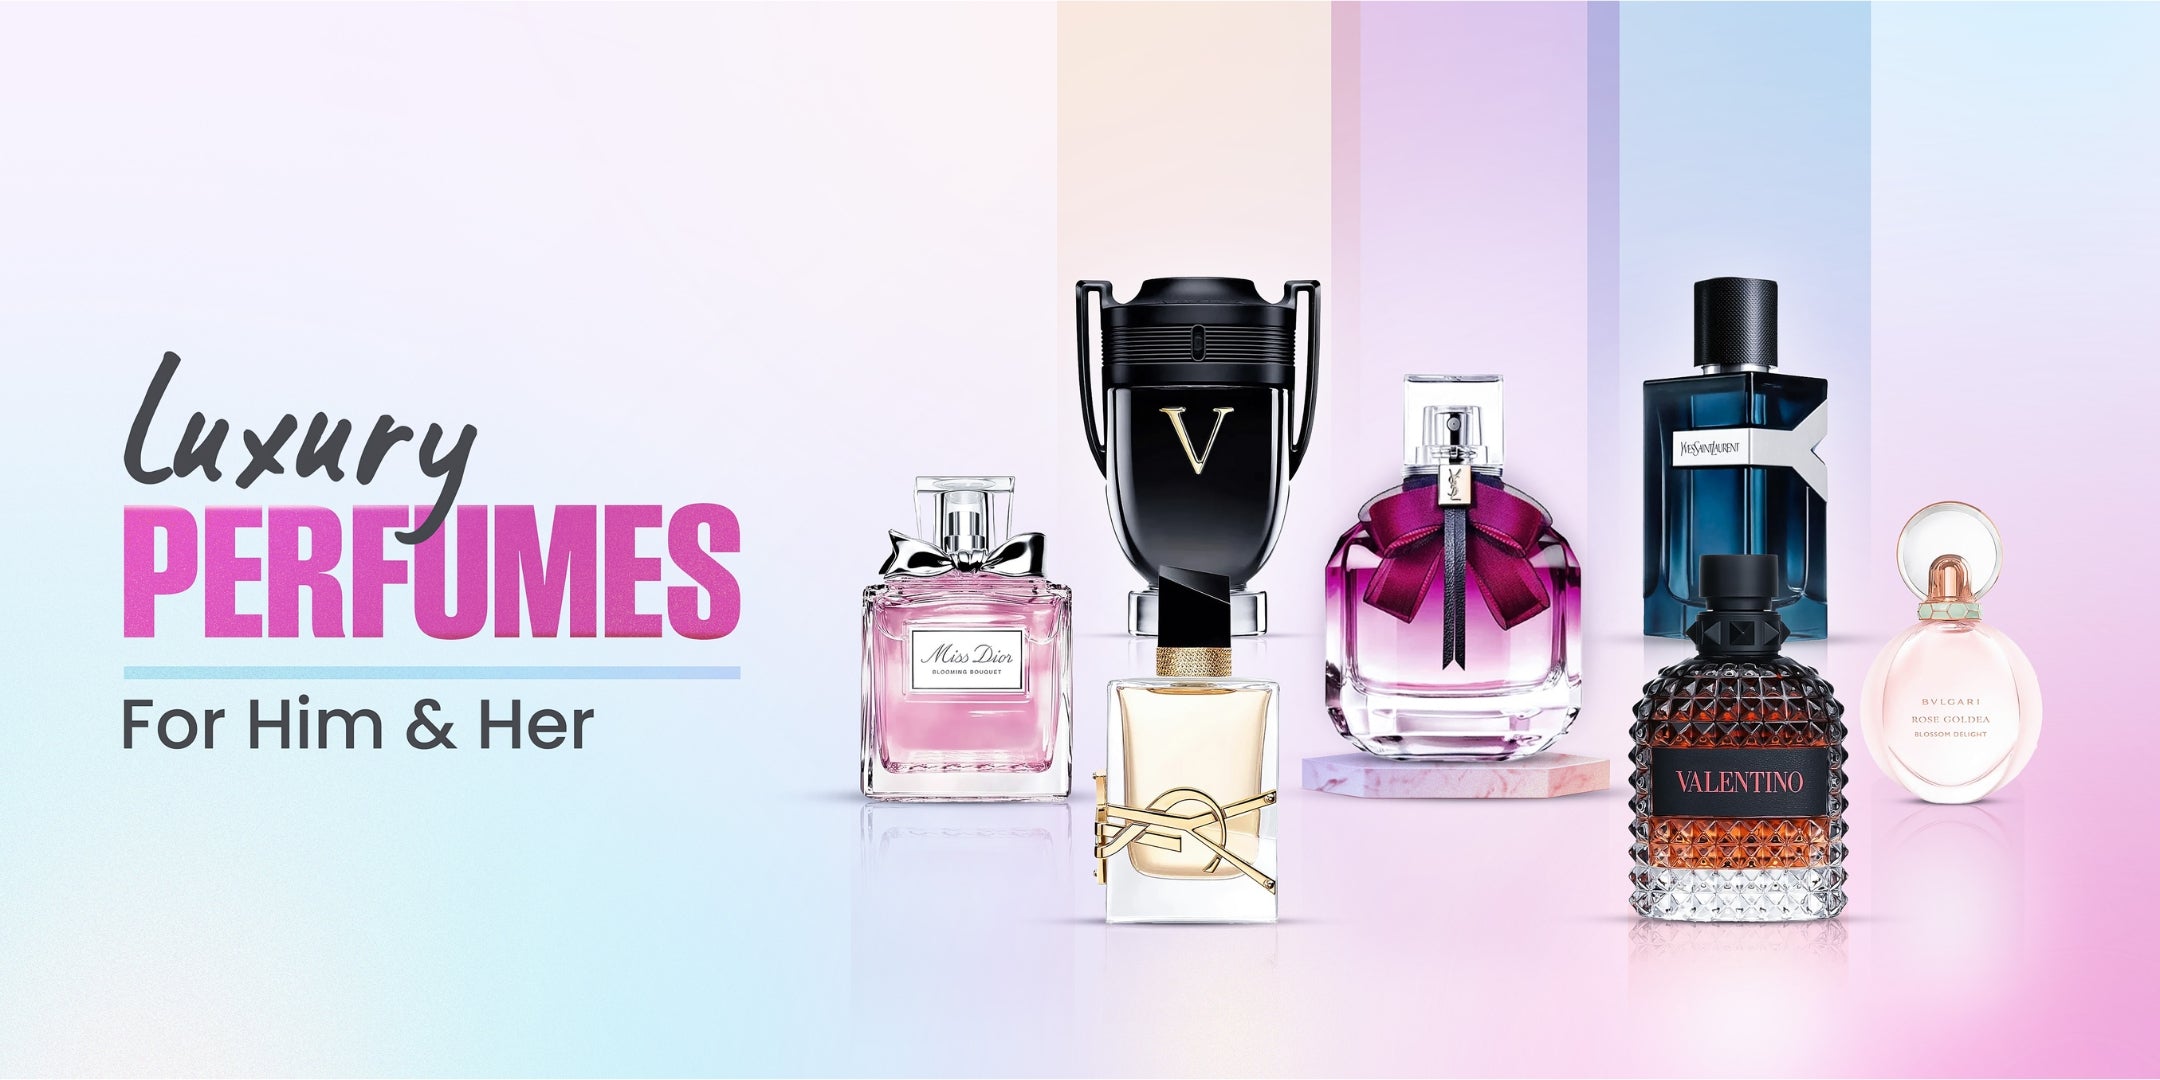 Latest Men's and Women's Perfume in NZ at Gadgets Online NZ LTD